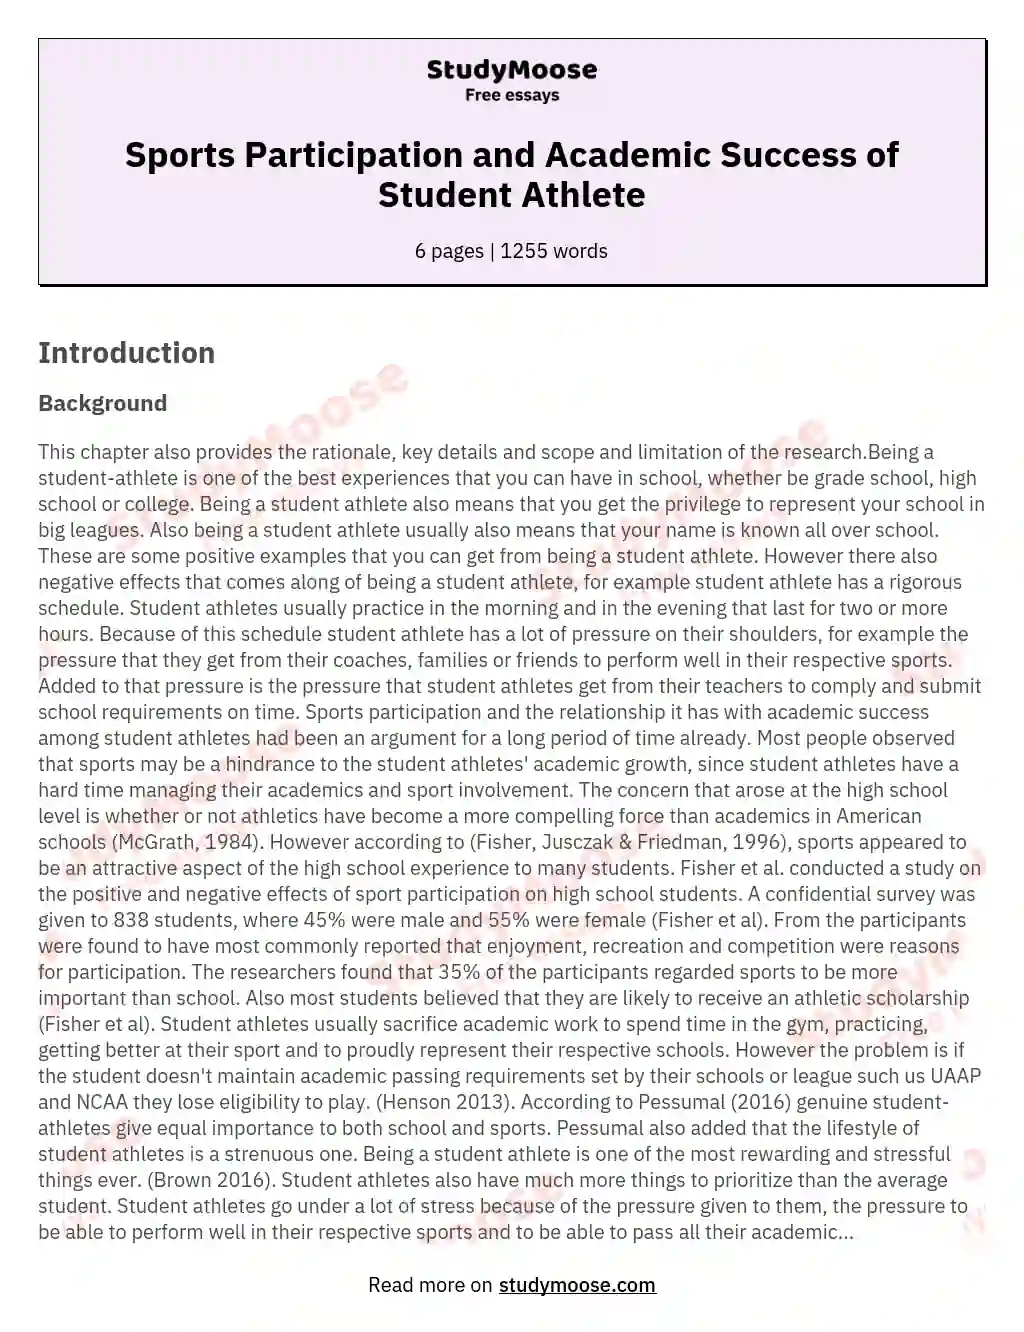 Sports Participation and Academic Success of Student Athlete